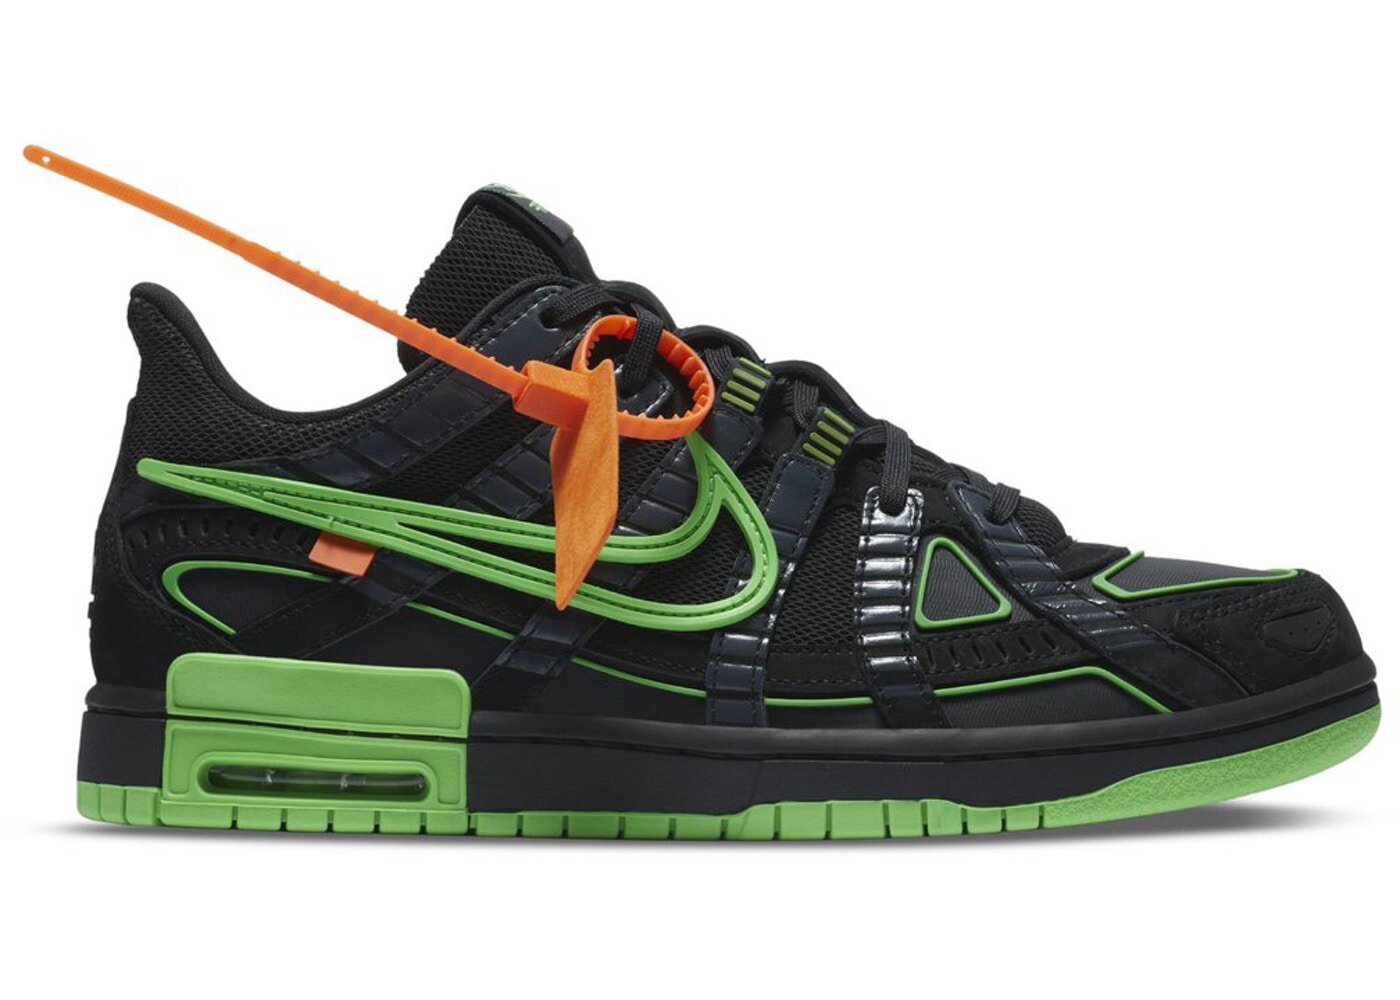 Now Available: Off-White x Nike Rubber Dunk 